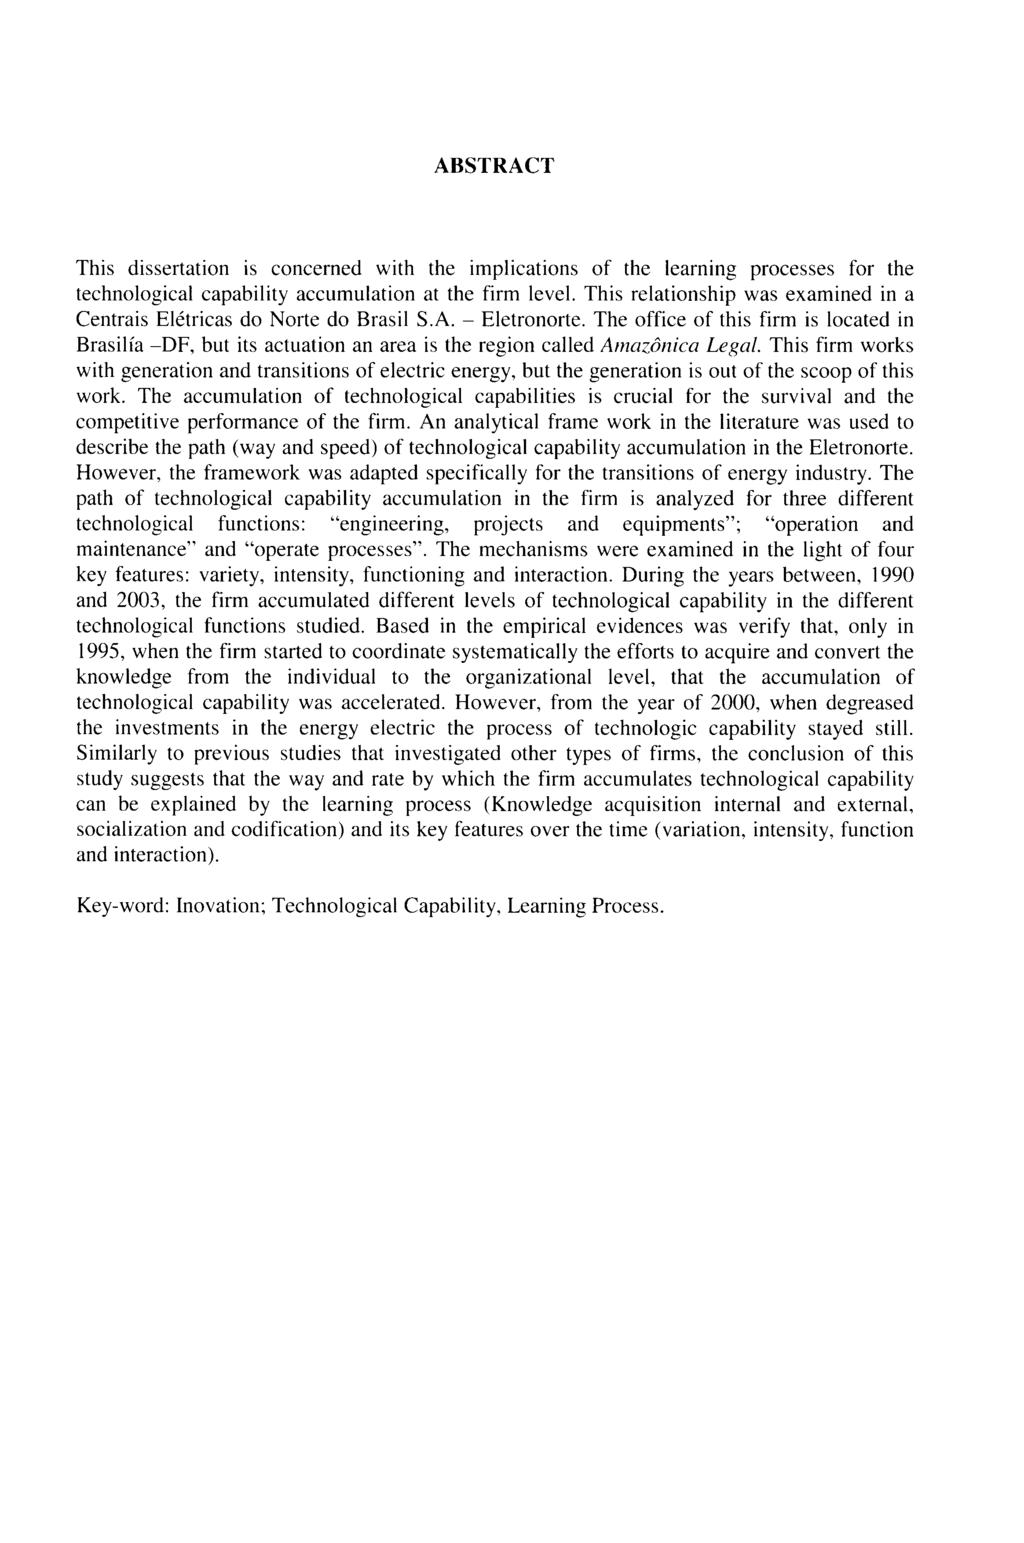 ABSTRACT This dissertation is concerned with the implications of the learning processes for the technological capability accumulation at the firm levei.